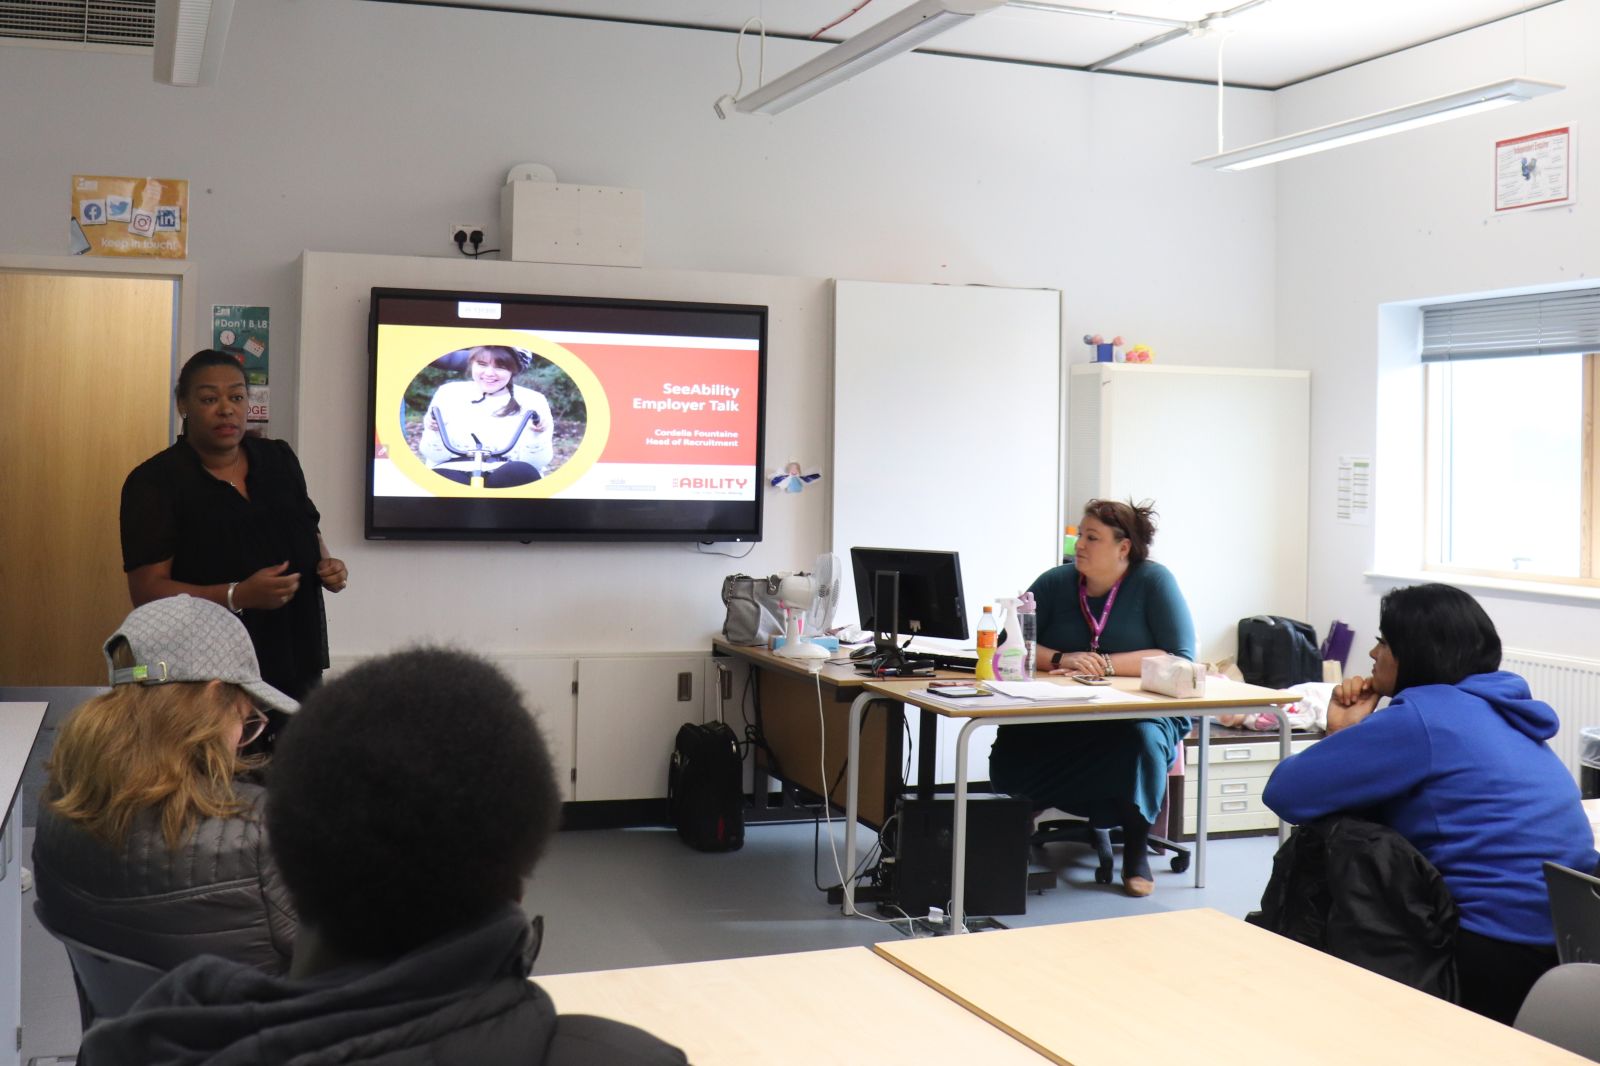 Health & Social Care and Childcare students hear from Seeability for National Apprenticeship Week.